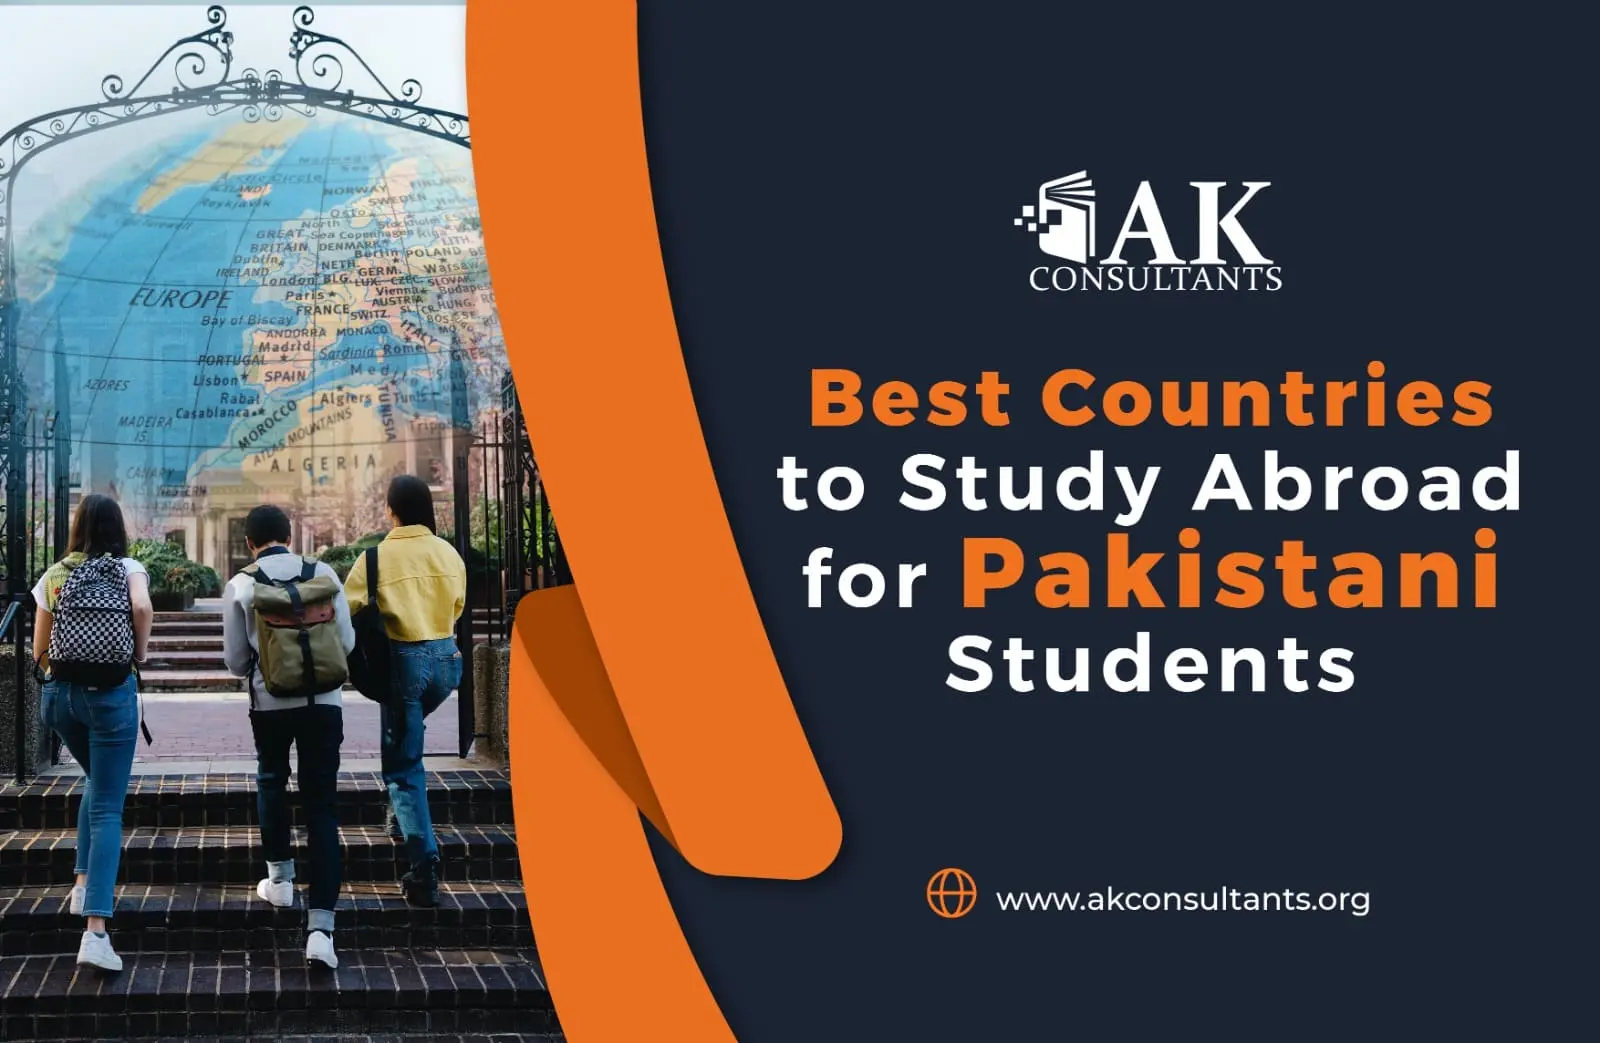 Best Countries to Study Abroad for Pakistani Students